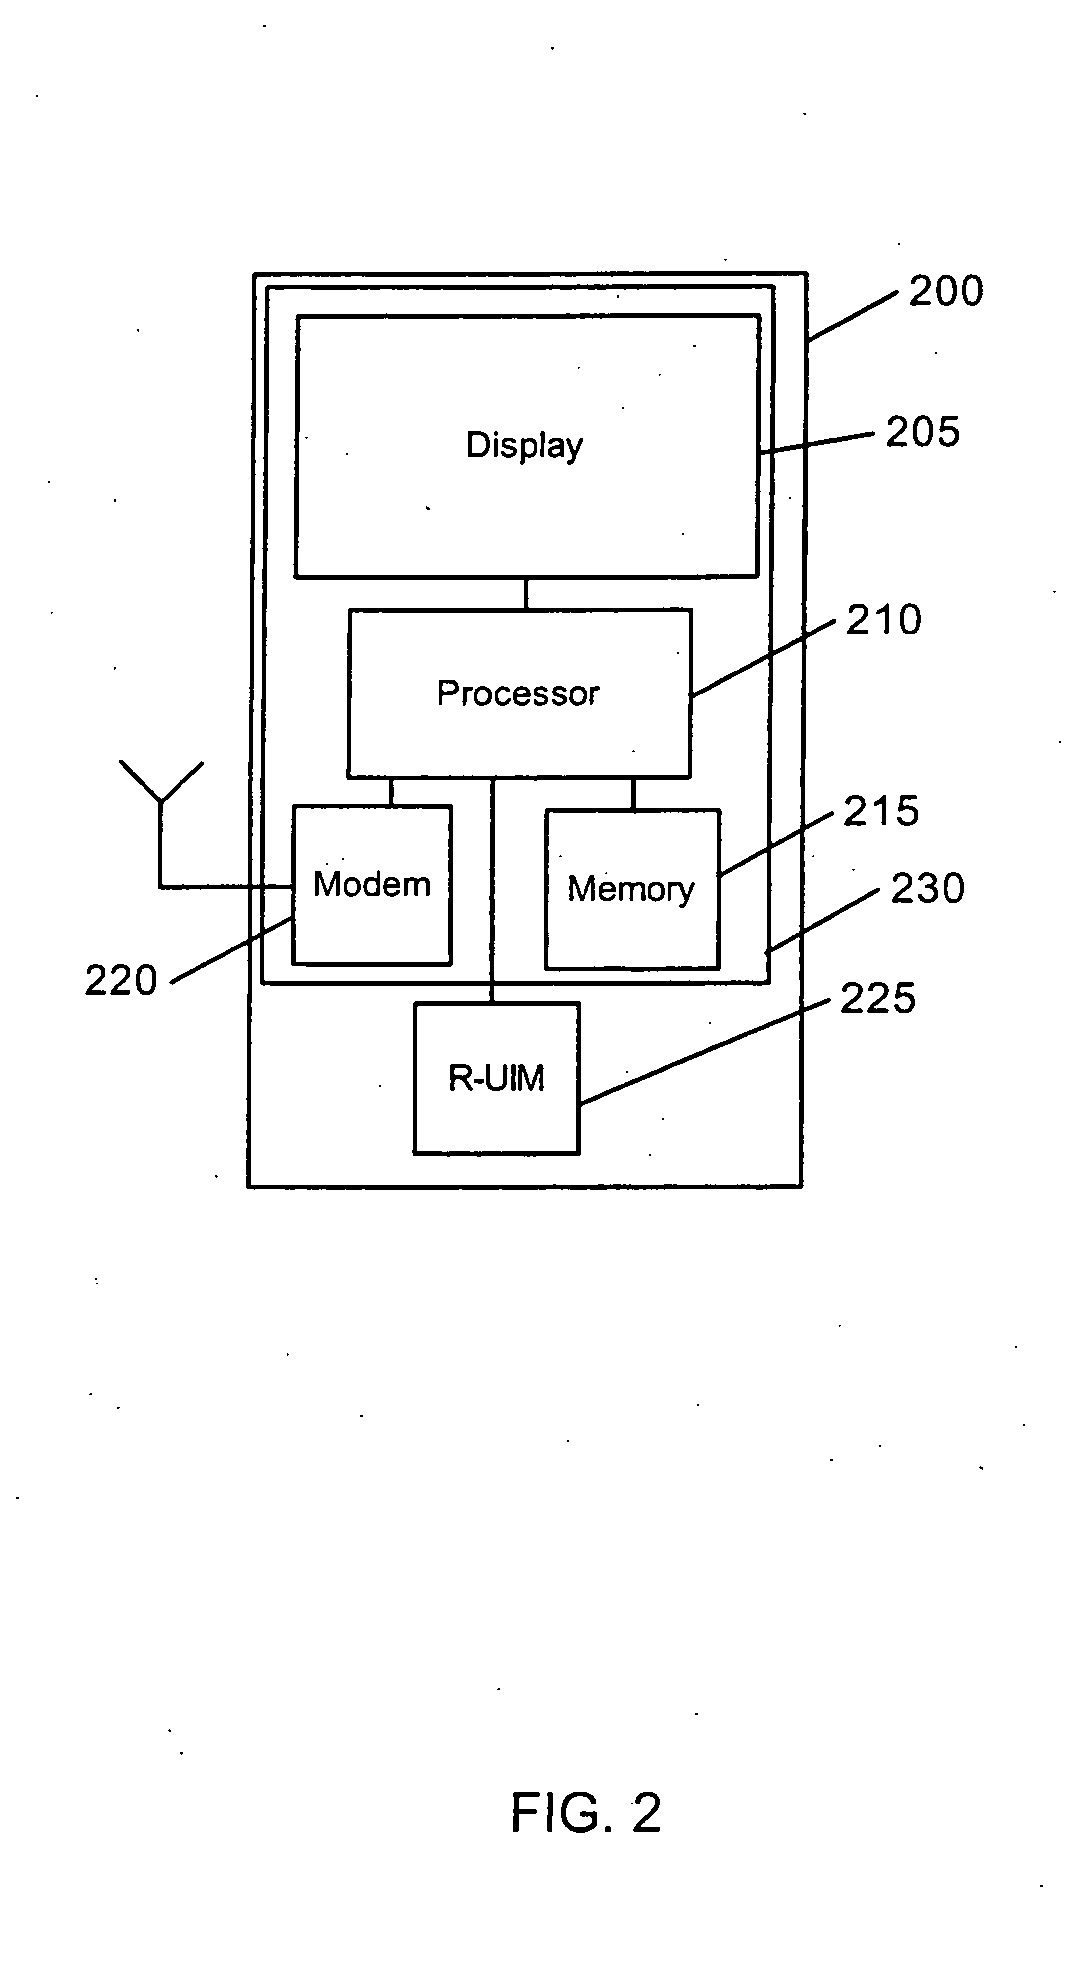 Methods and apparatus for providing consistency in SMS message timestamp formatting for mobile communication devices